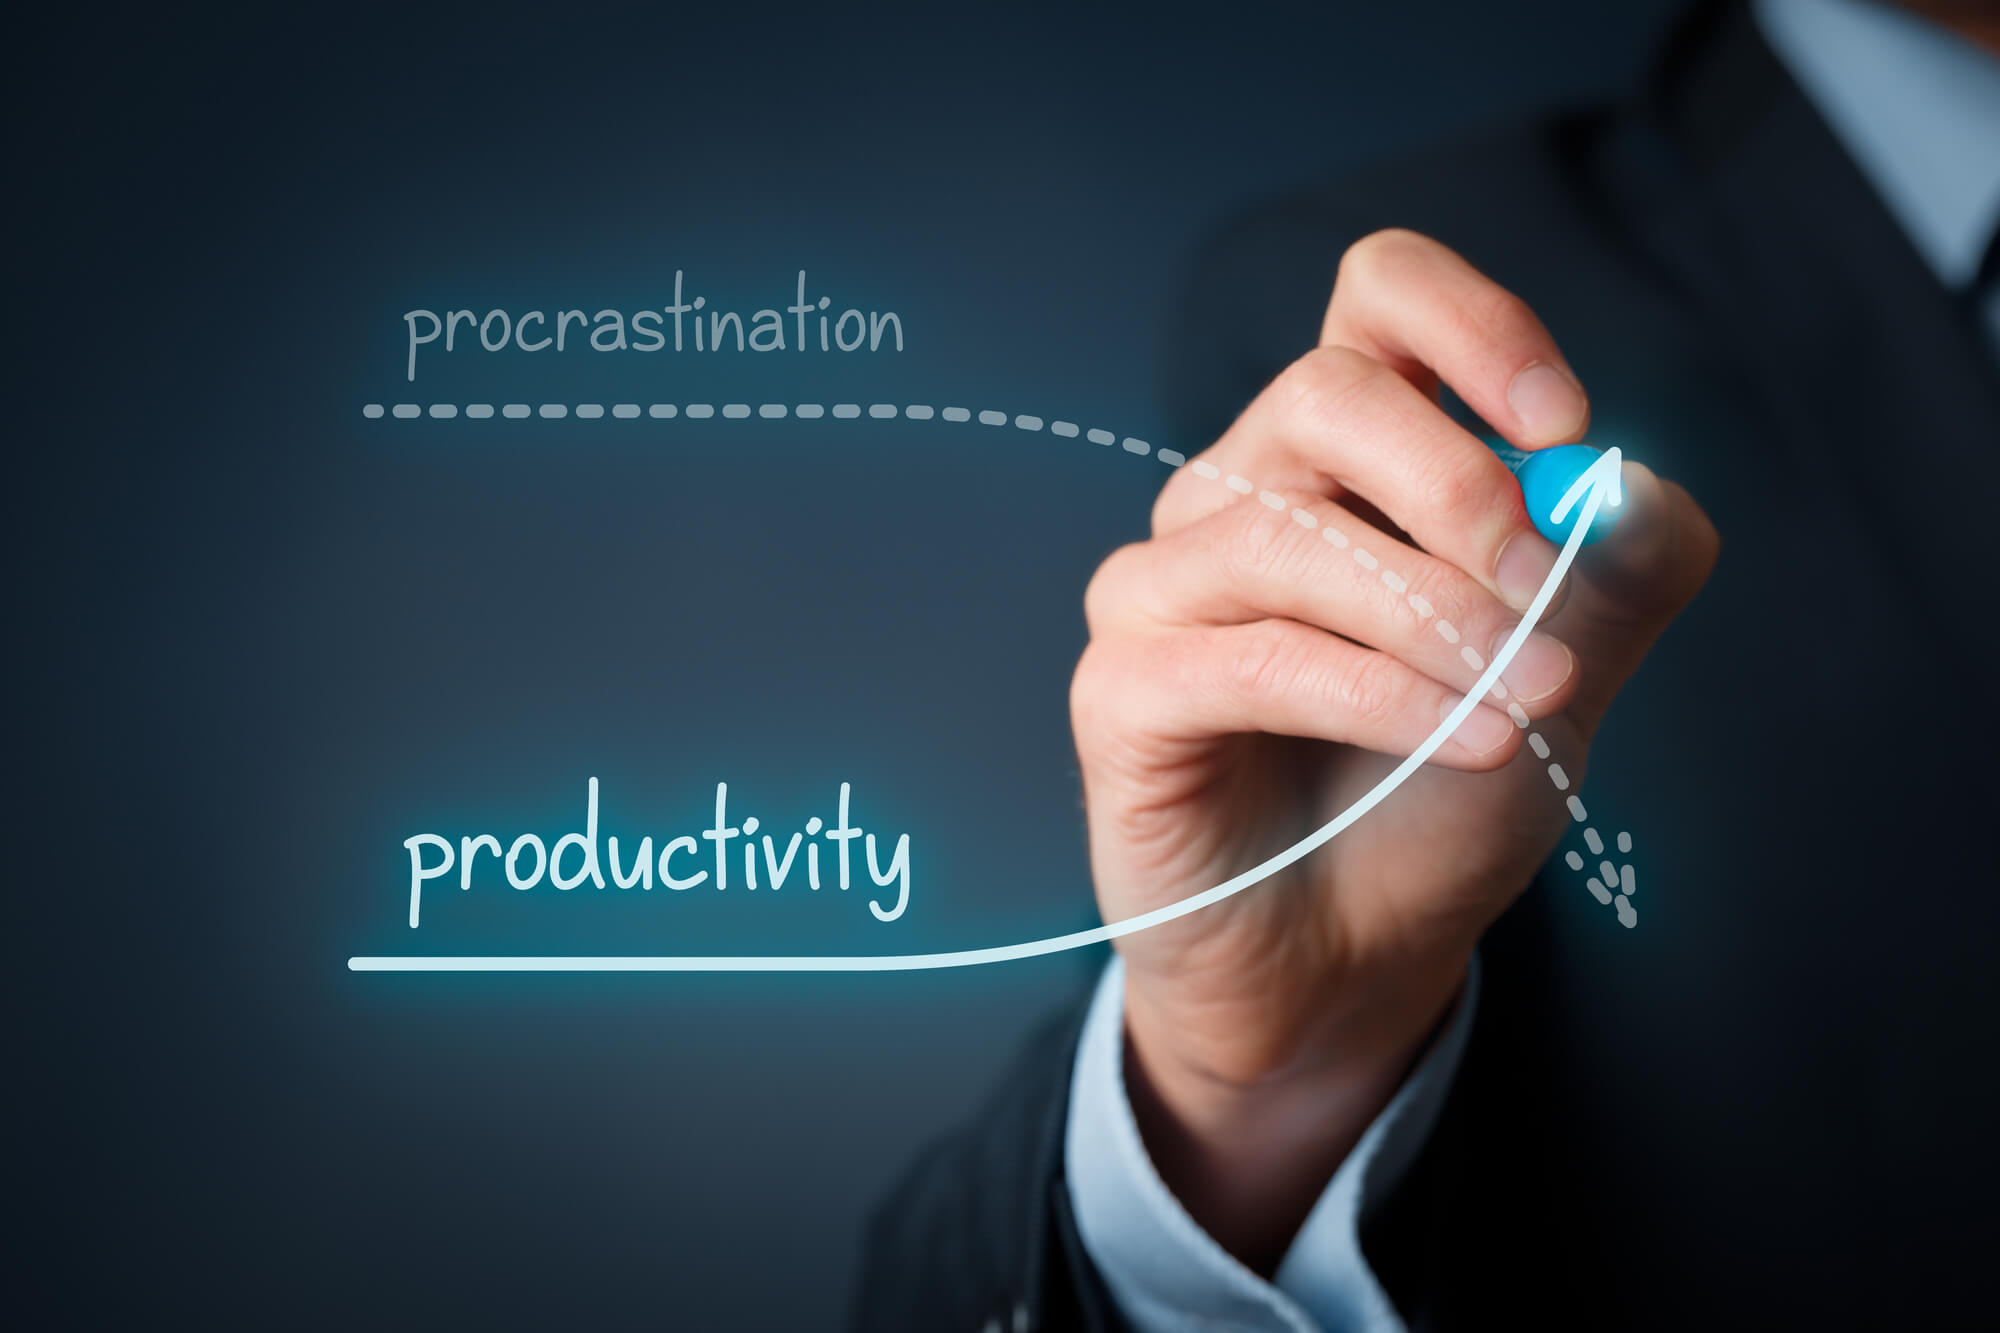 Quality and Productivity